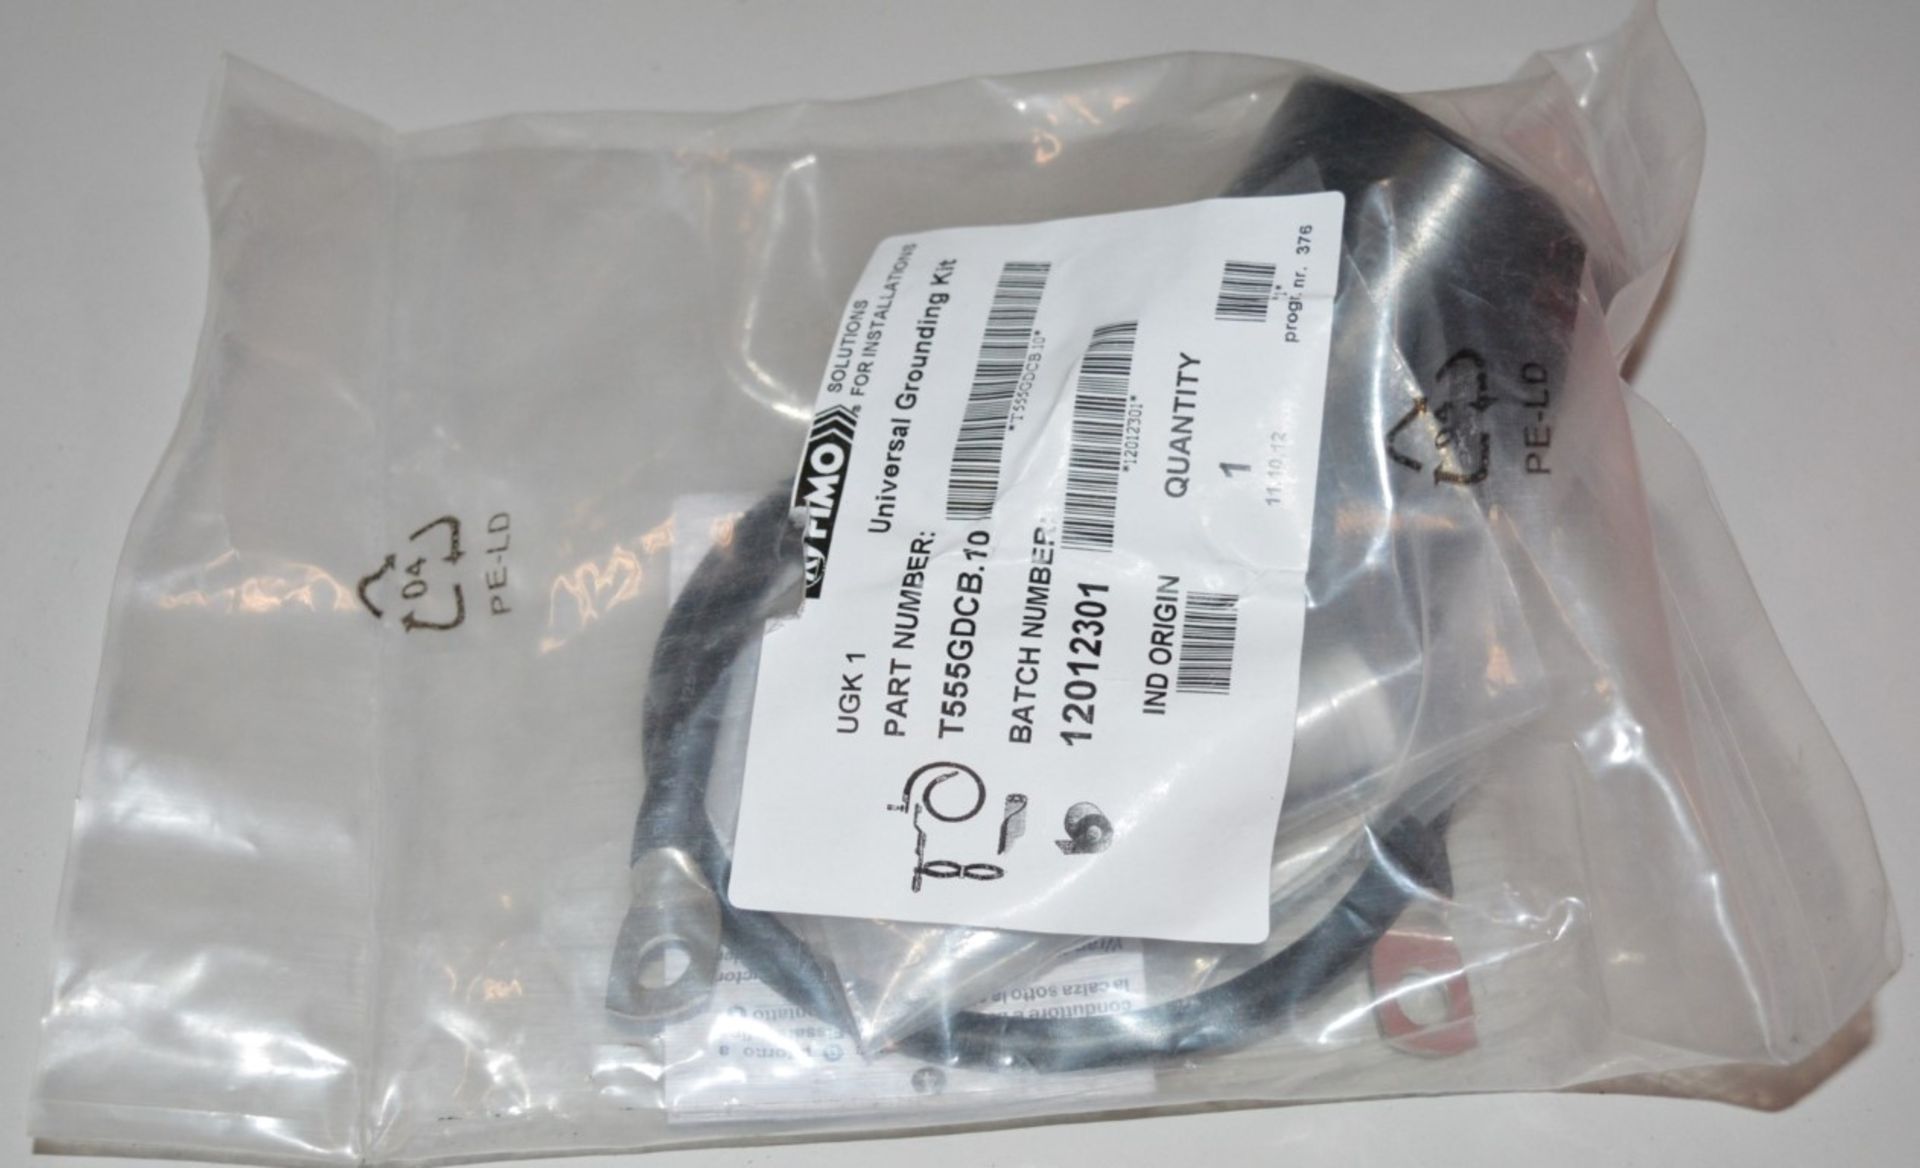 8 x Fimo Universal Grounding Kits - Part Number T555GDCB.10 - Brand New in Packets - Please See - Image 5 of 8